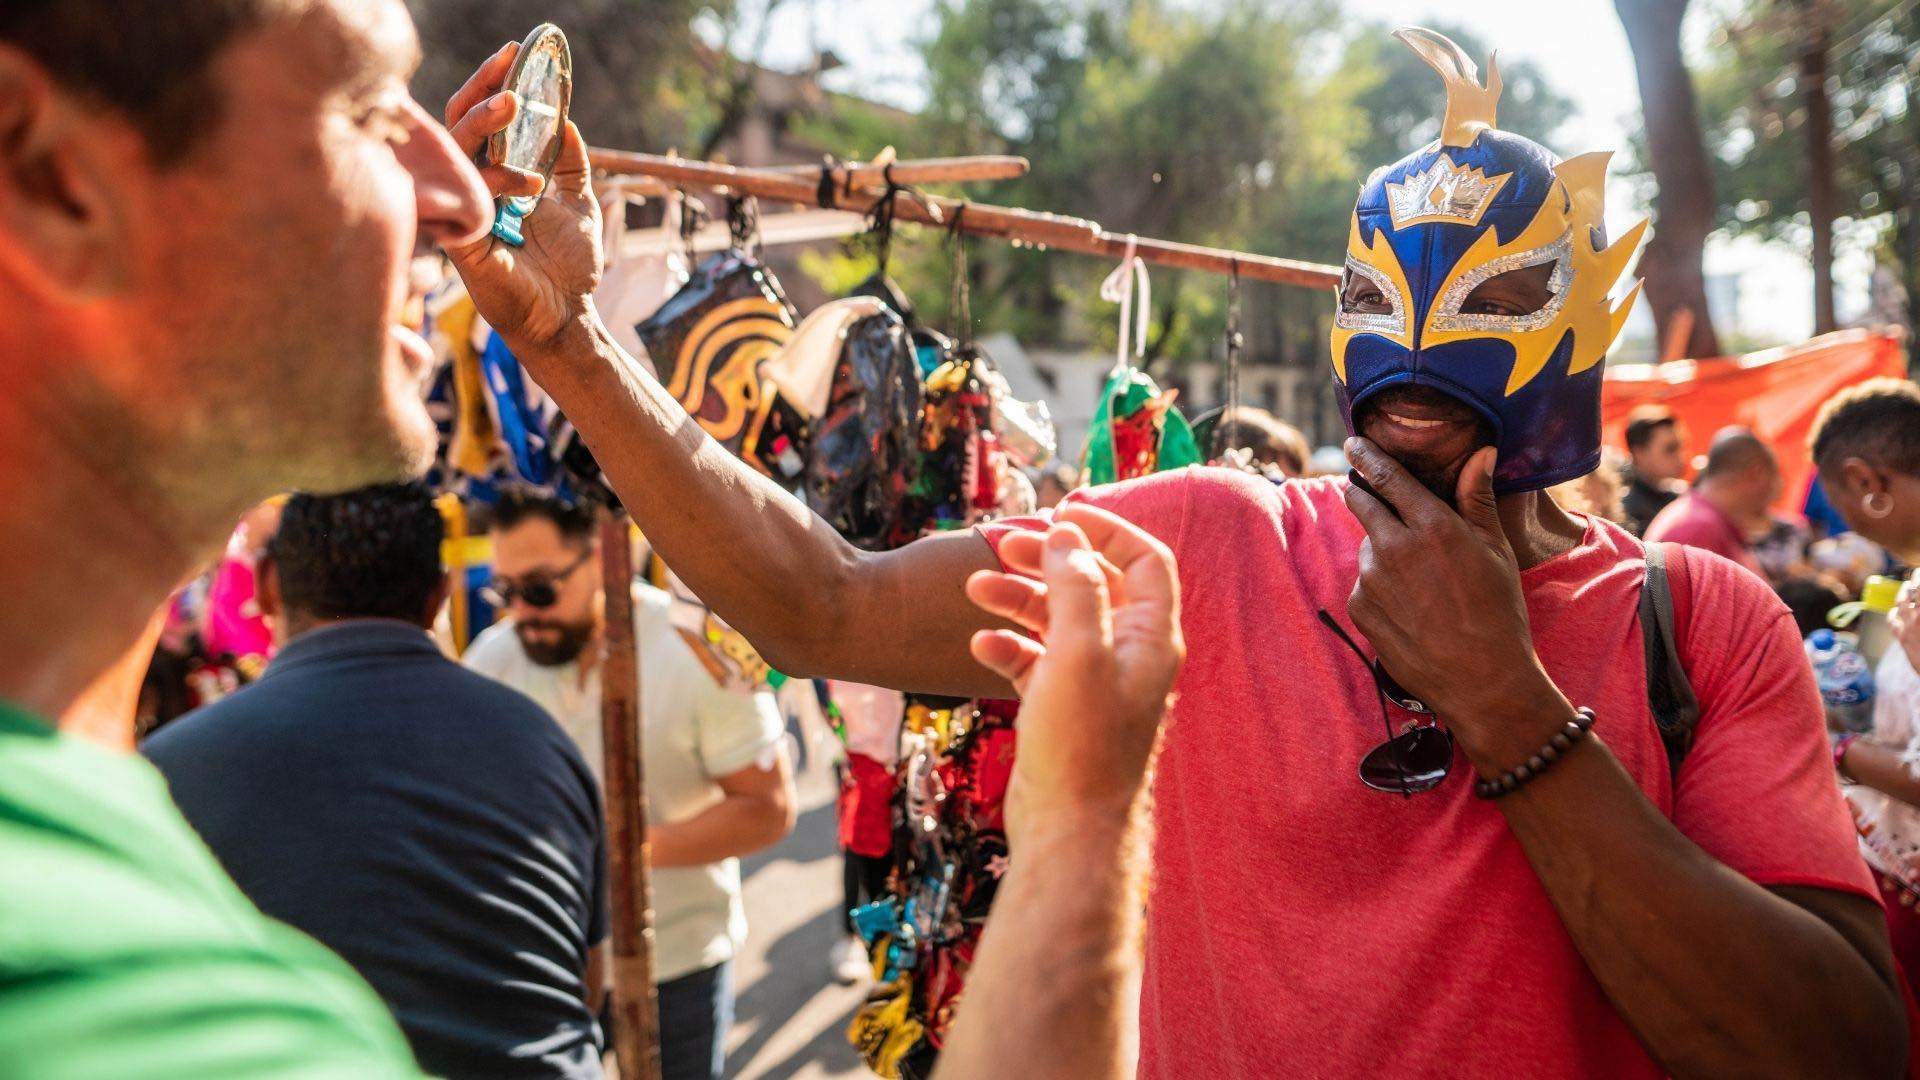 Celebrate Like a Local with These Must-See Festivals and Events Around the World